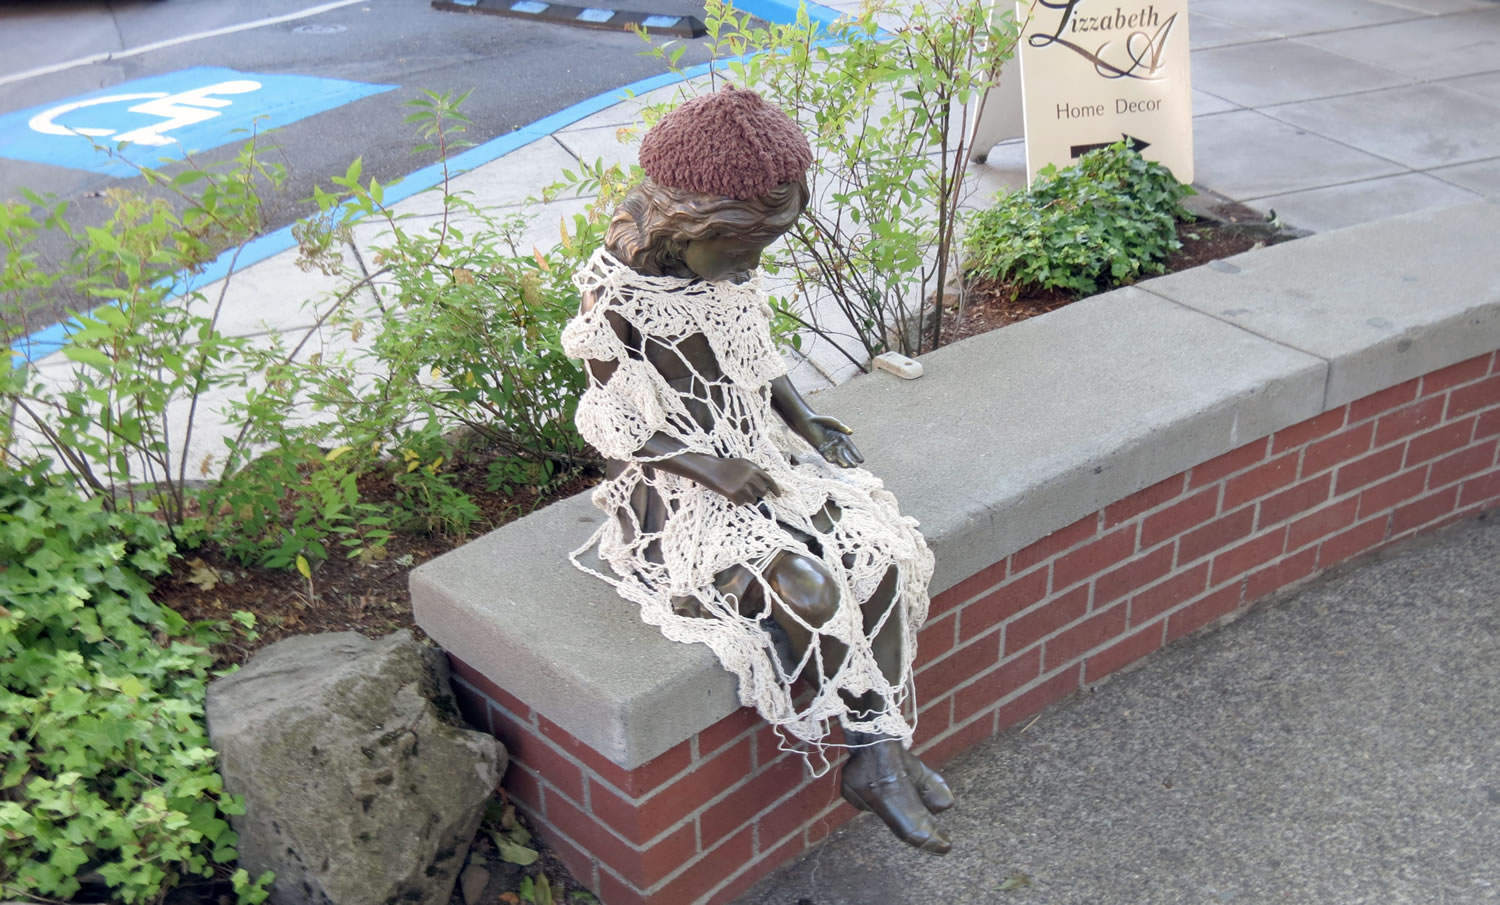 The festival volunteers got creative in their scavenger hunt, &quot;yarn bombing&quot; all over downtown, including the bronze statue located at the fountain at Northeast Fourth Avenue and Cedar Street.